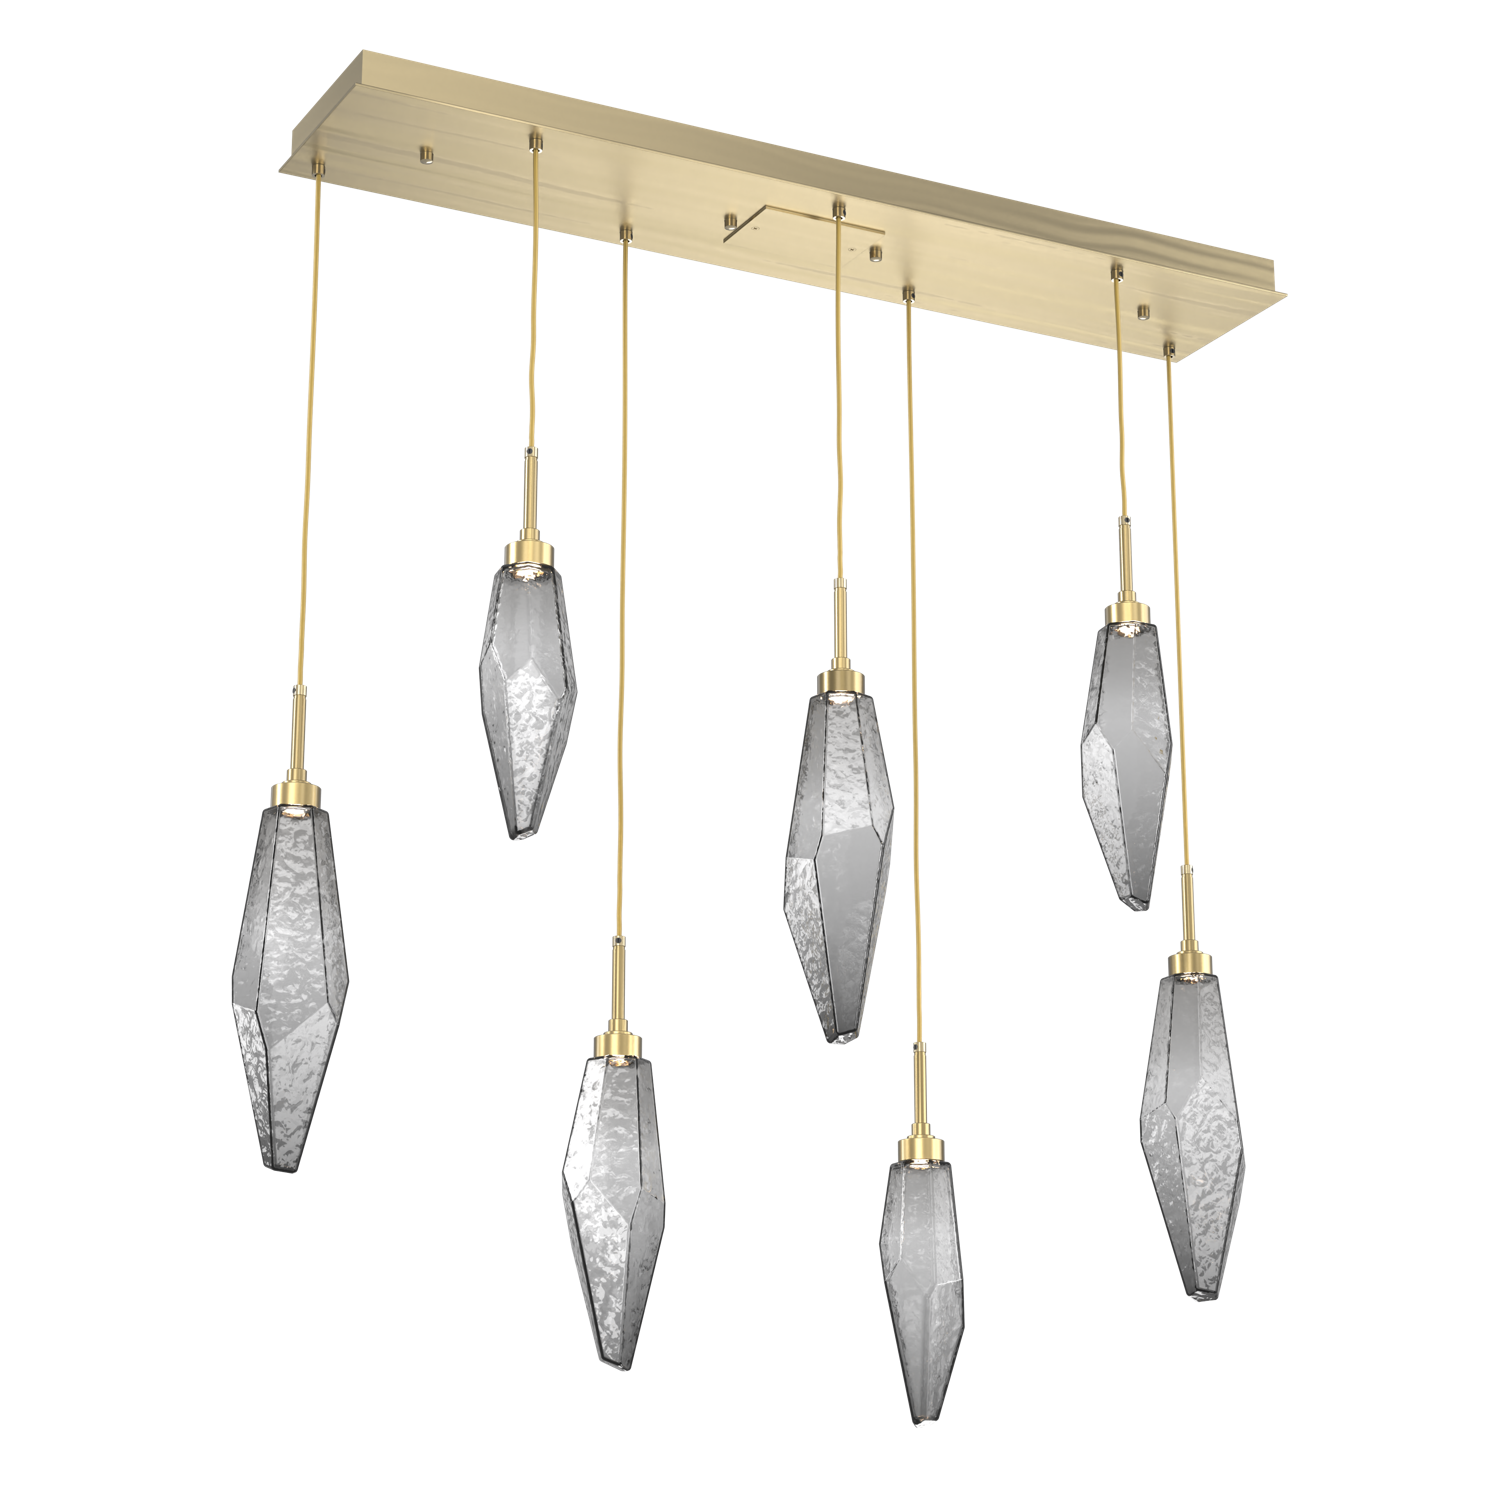 PLB0050-07-HB-CS-Hammerton-Studio-Rock-Crystal-7-light-linear-pendant-chandelier-with-heritage-brass-finish-and-chilled-smoke-glass-shades-and-LED-lamping